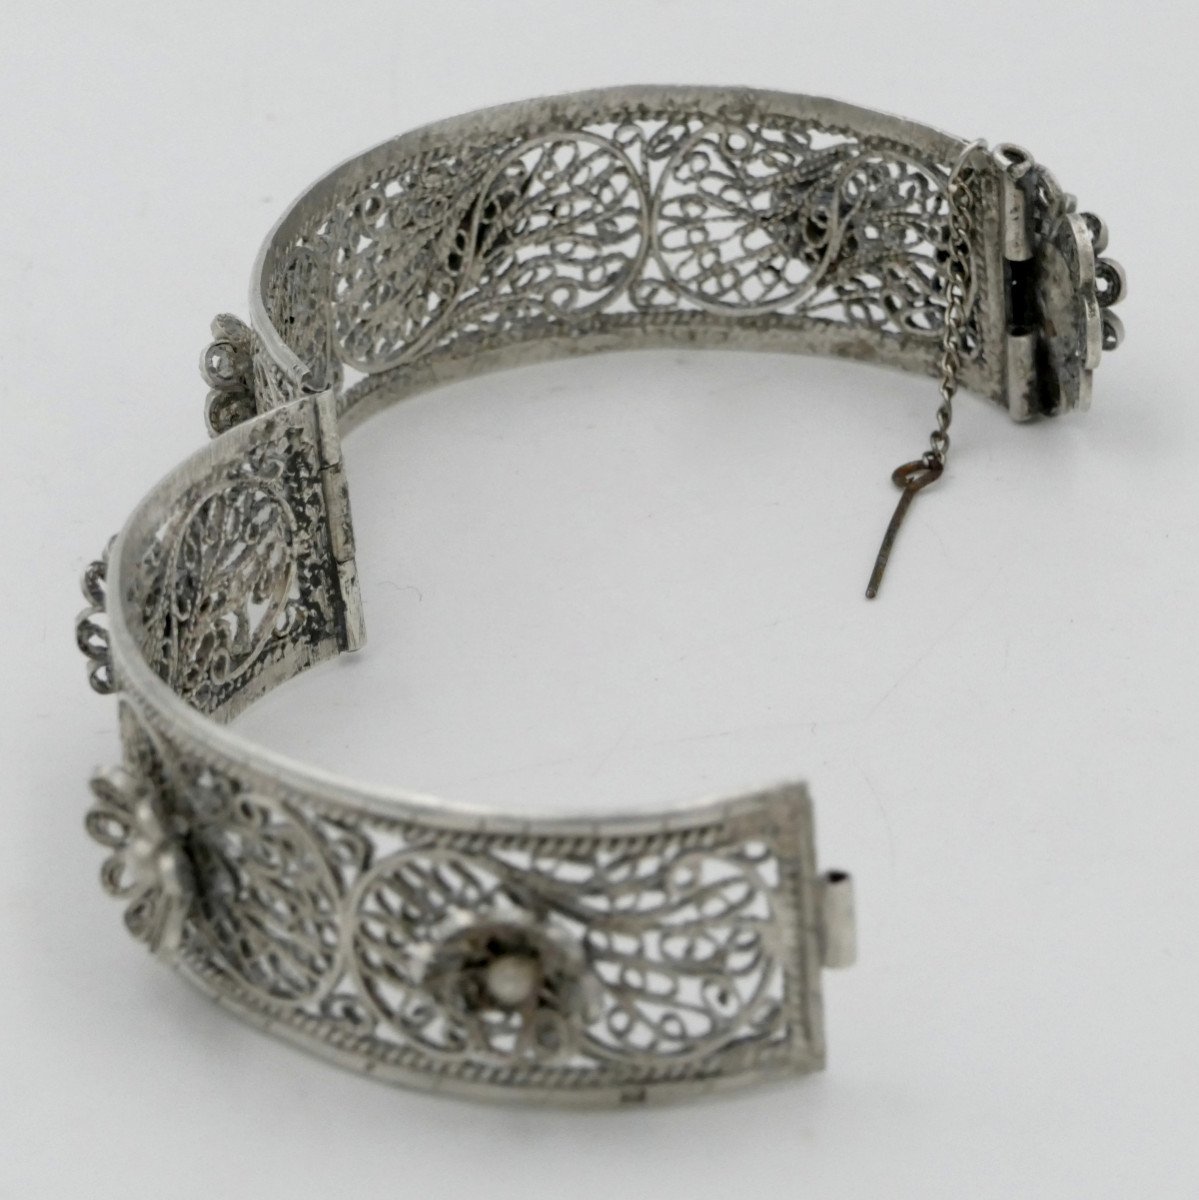 Cuff Bracelet With Flower Decor, Sterling Silver, Tunisia, 20th Century.-photo-1